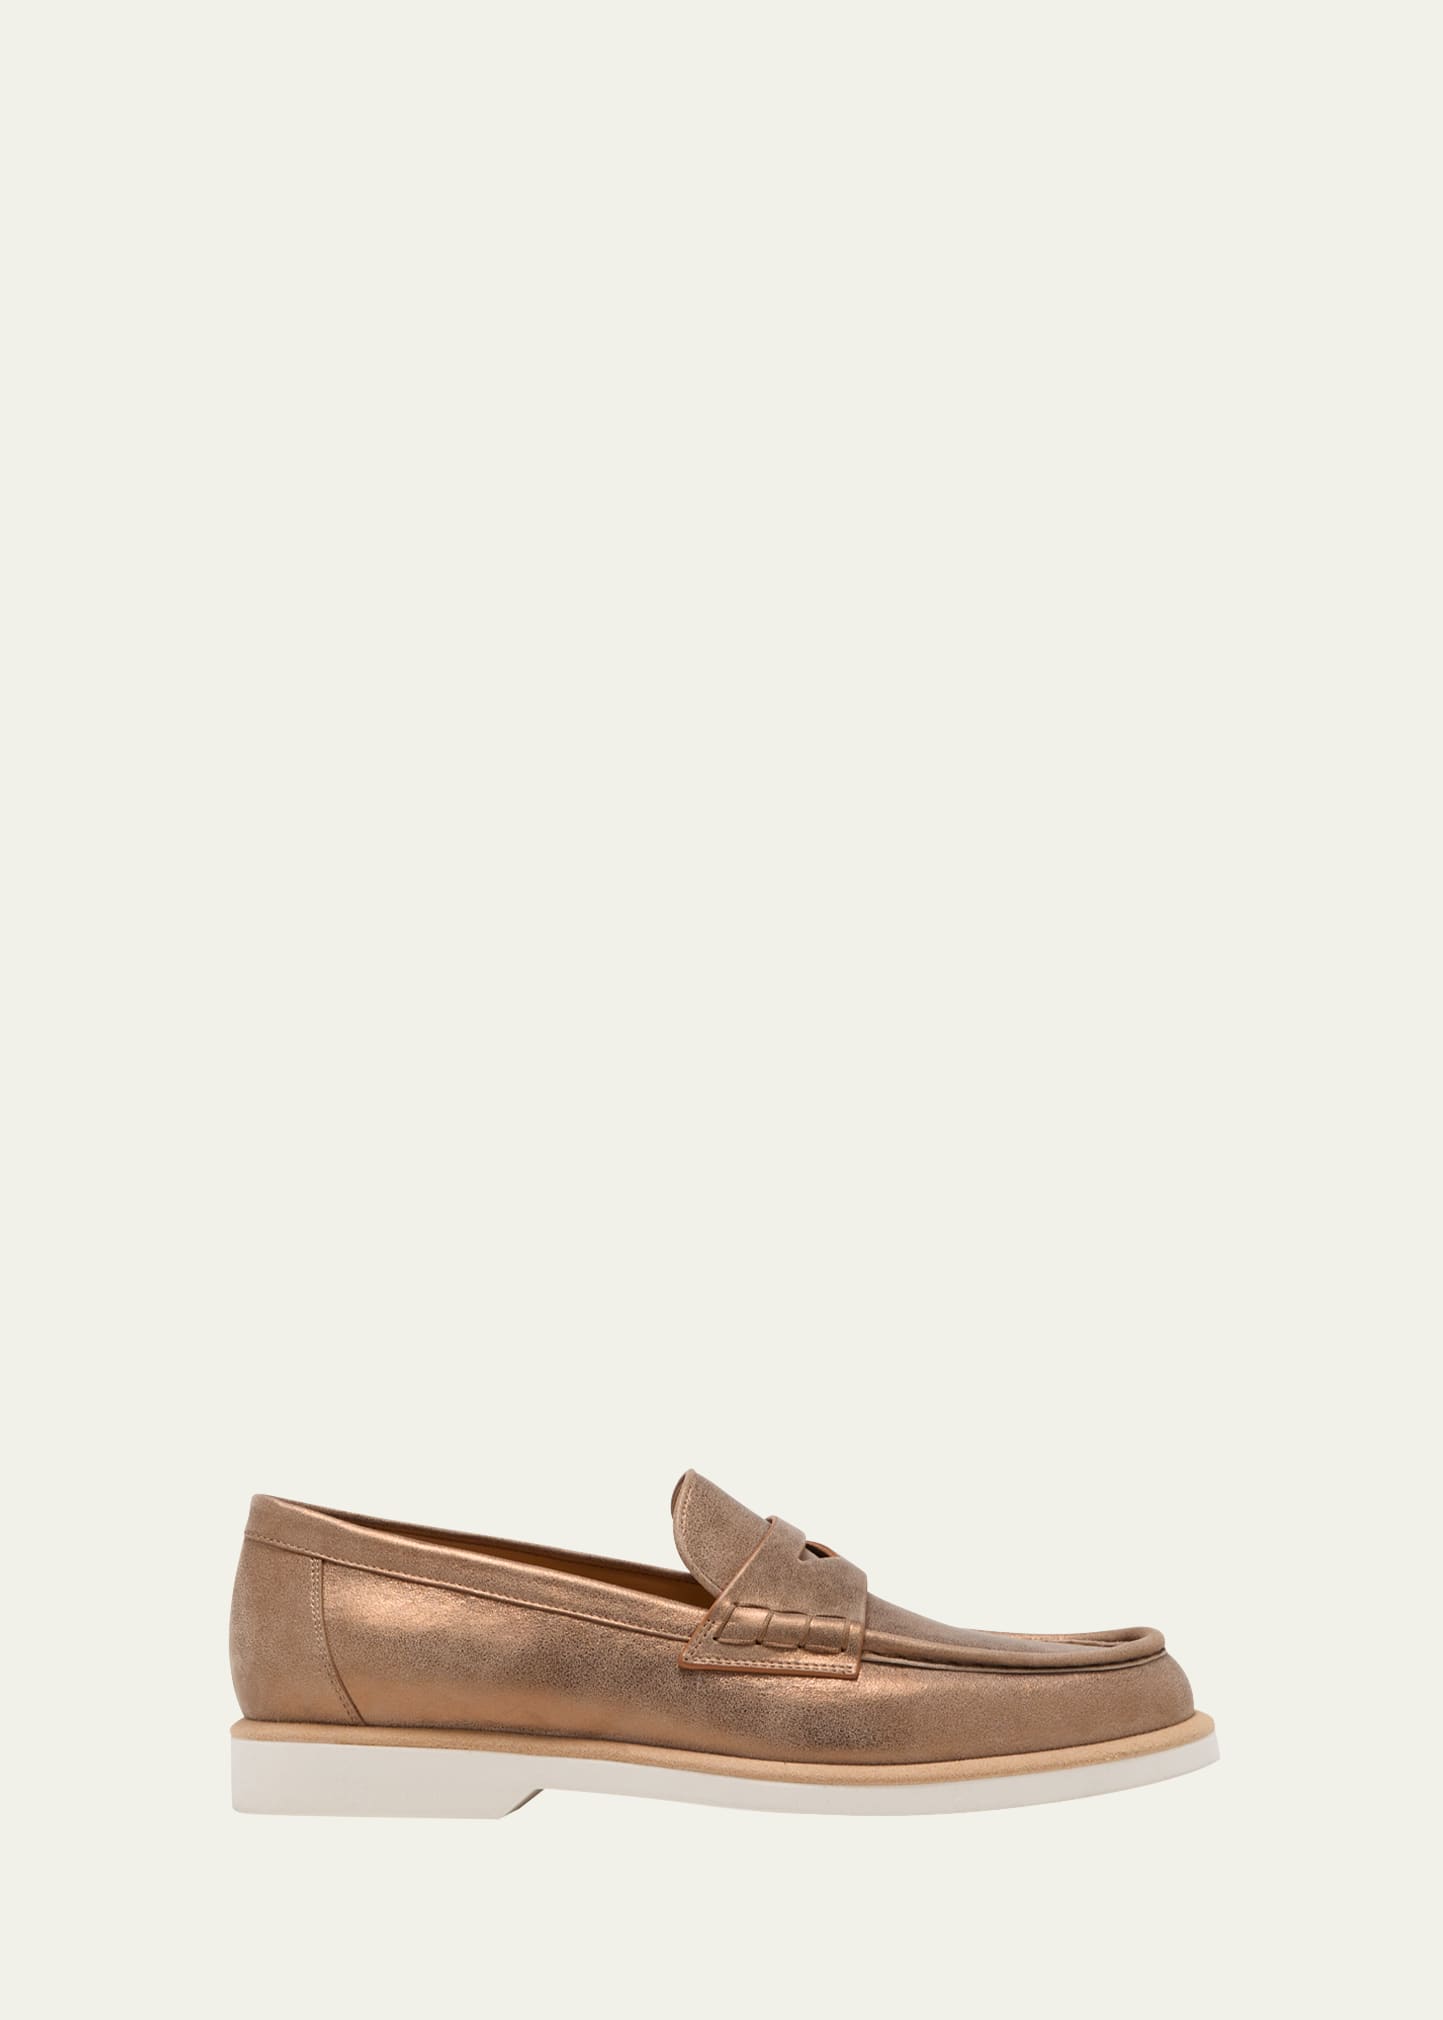 Gallery Metallic Casual Penny Loafers